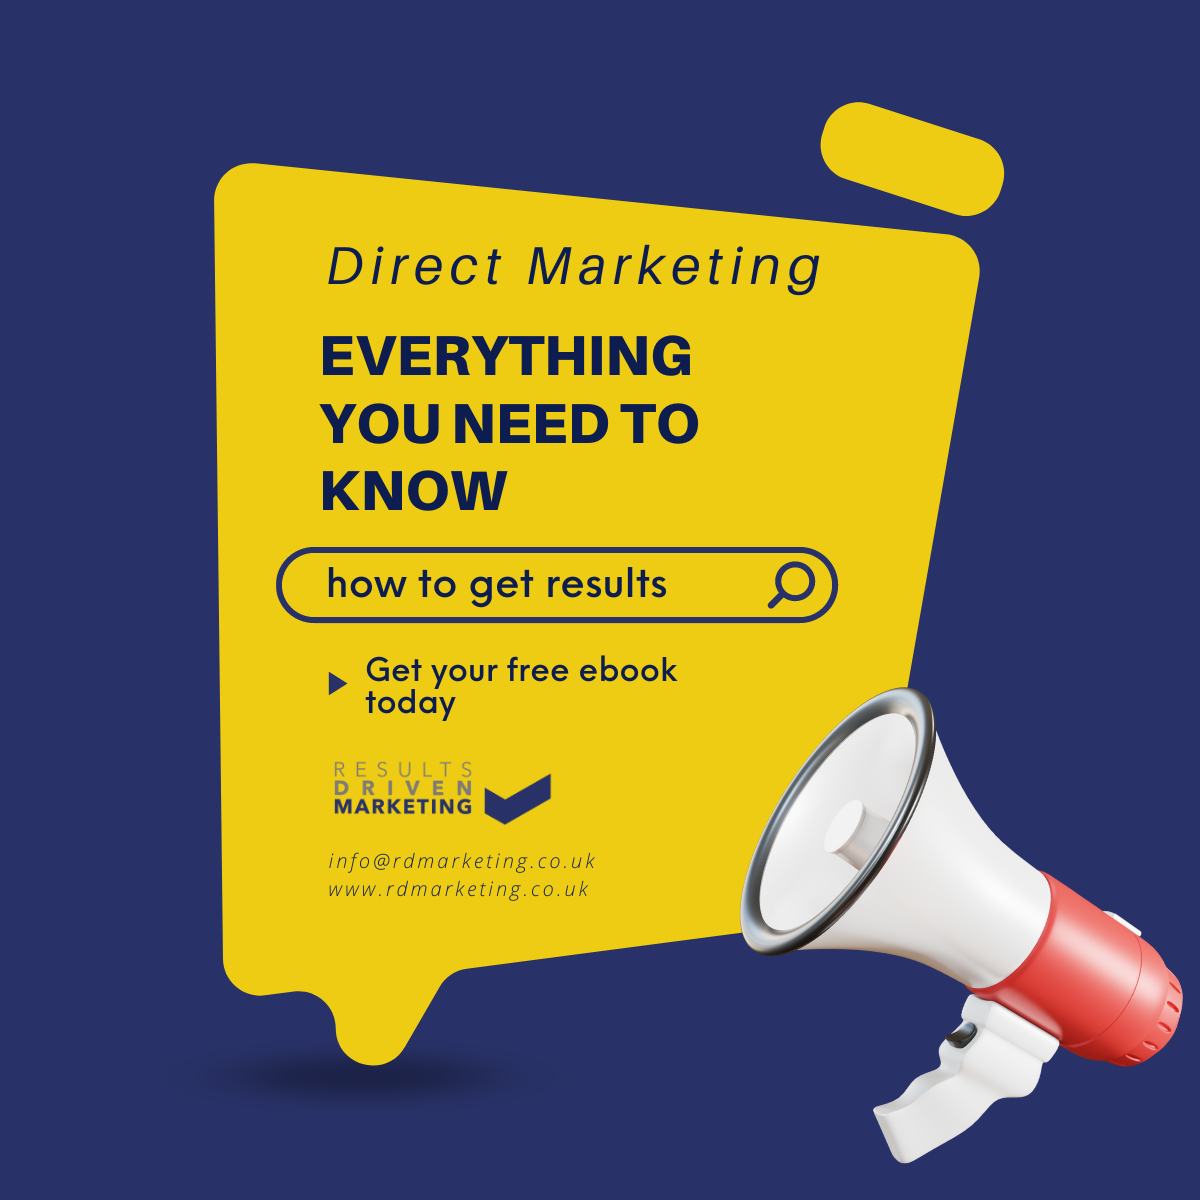 Direct Marketing - Everything you need to know